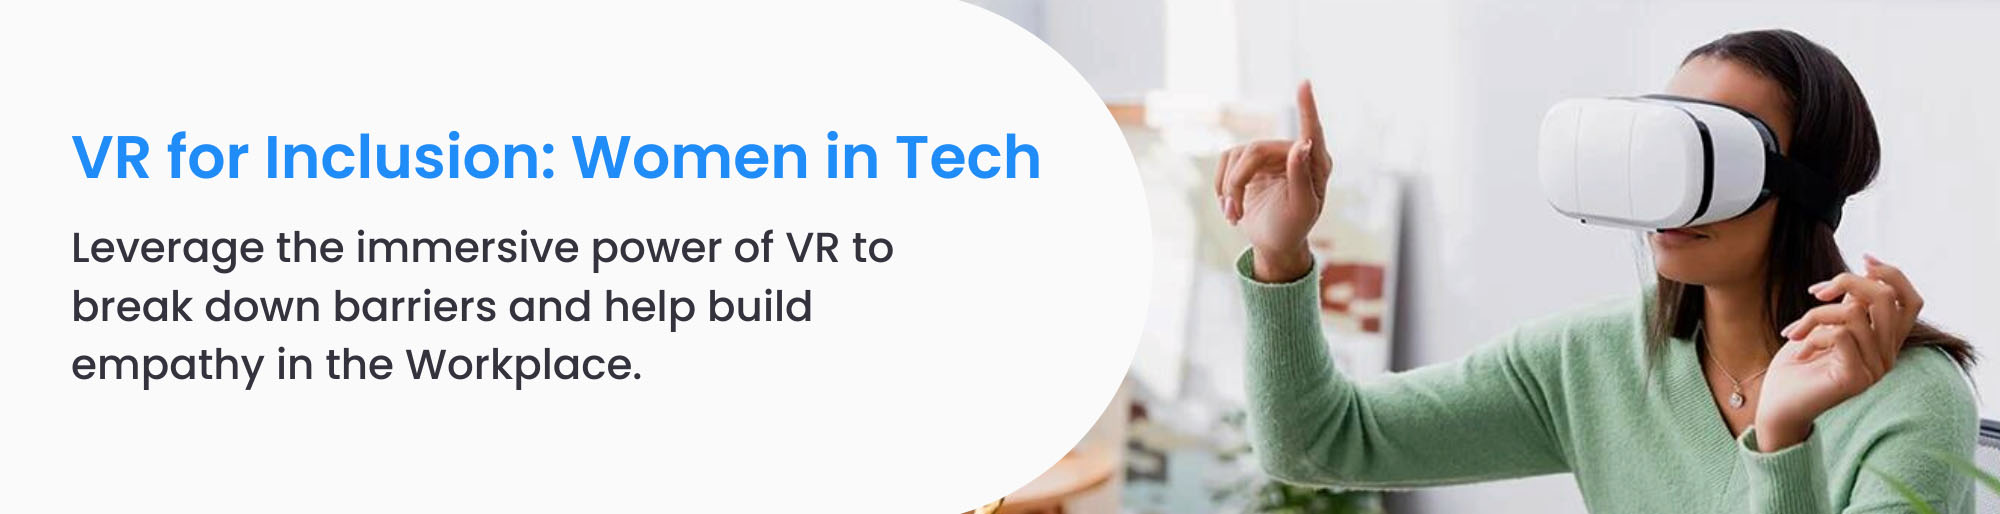 VR for InclusionWomen in Tech banner